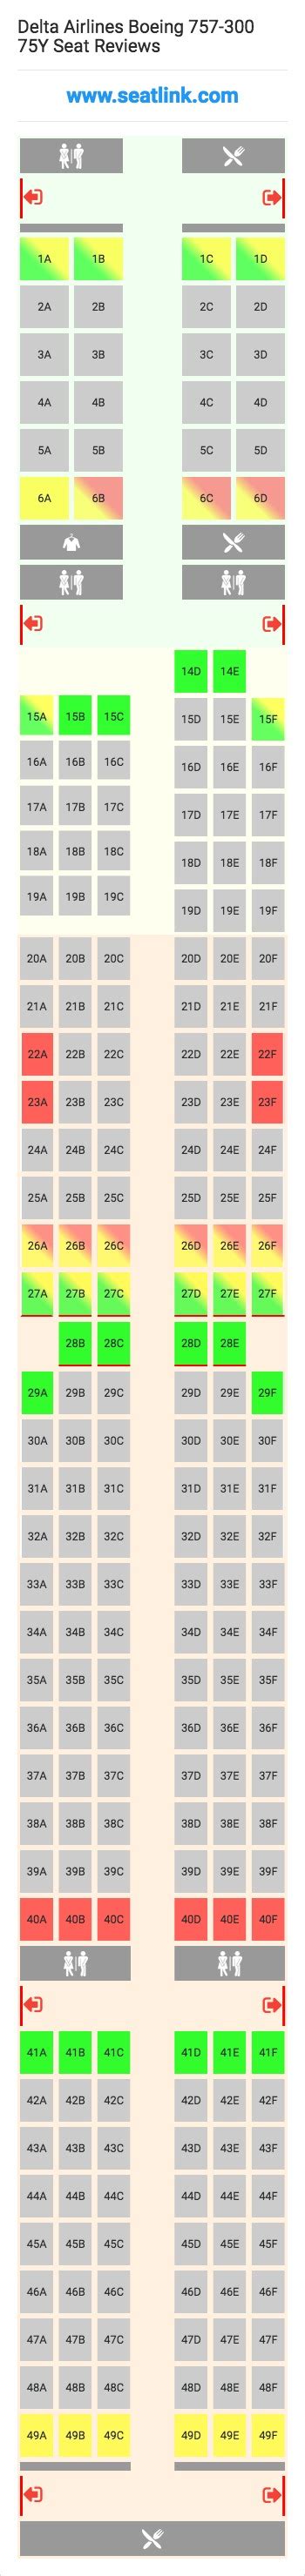 Delta Airlines Boeing 757 300 75y 753 Seat Map